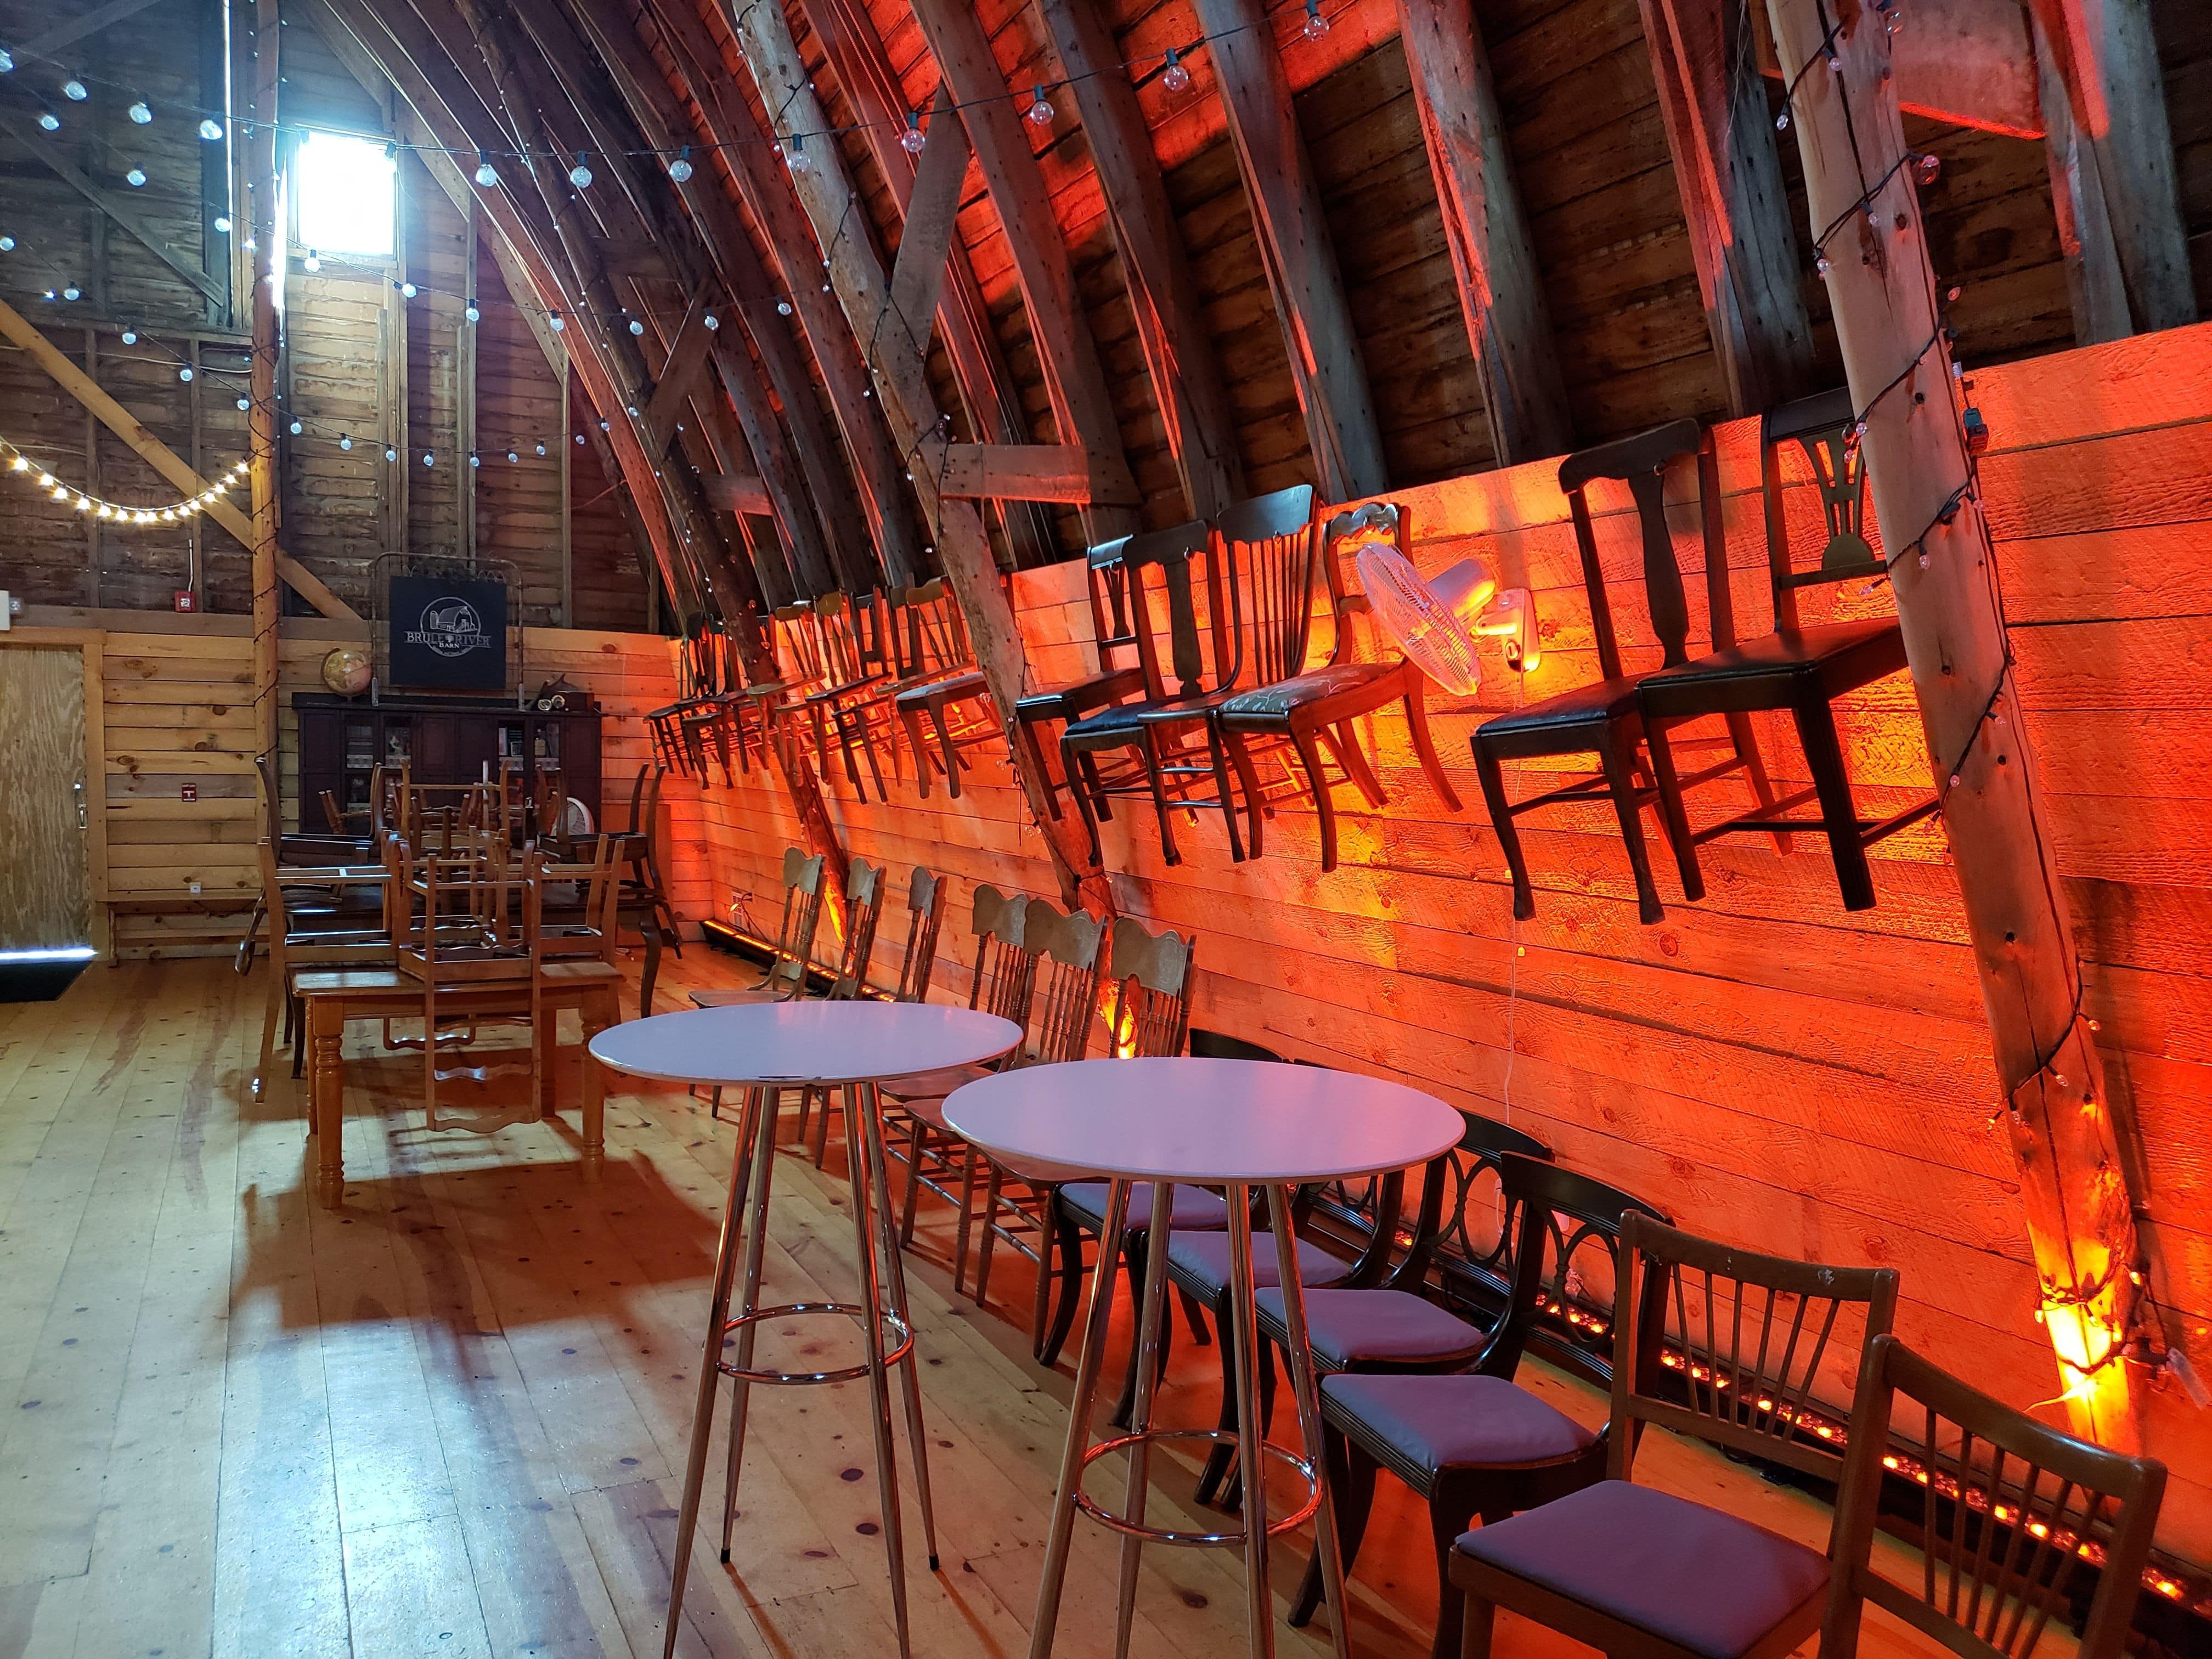 Wedding lighting at the Brule River Barn. Up lighting in red.